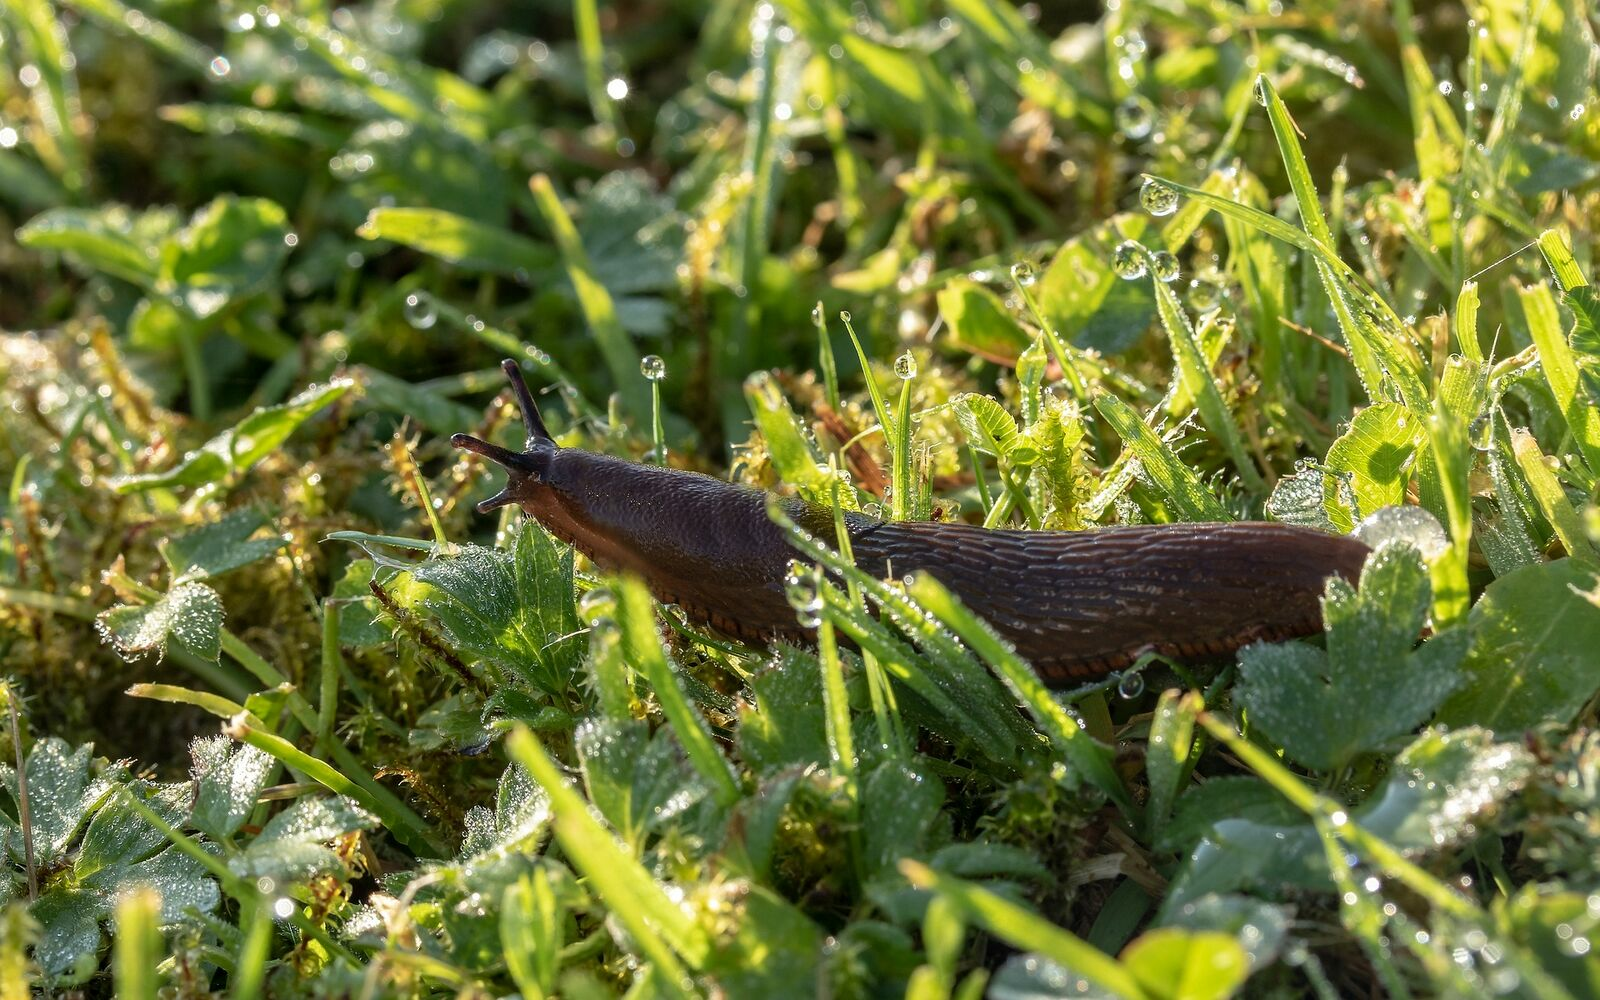 Garden snails: How to get rid of them